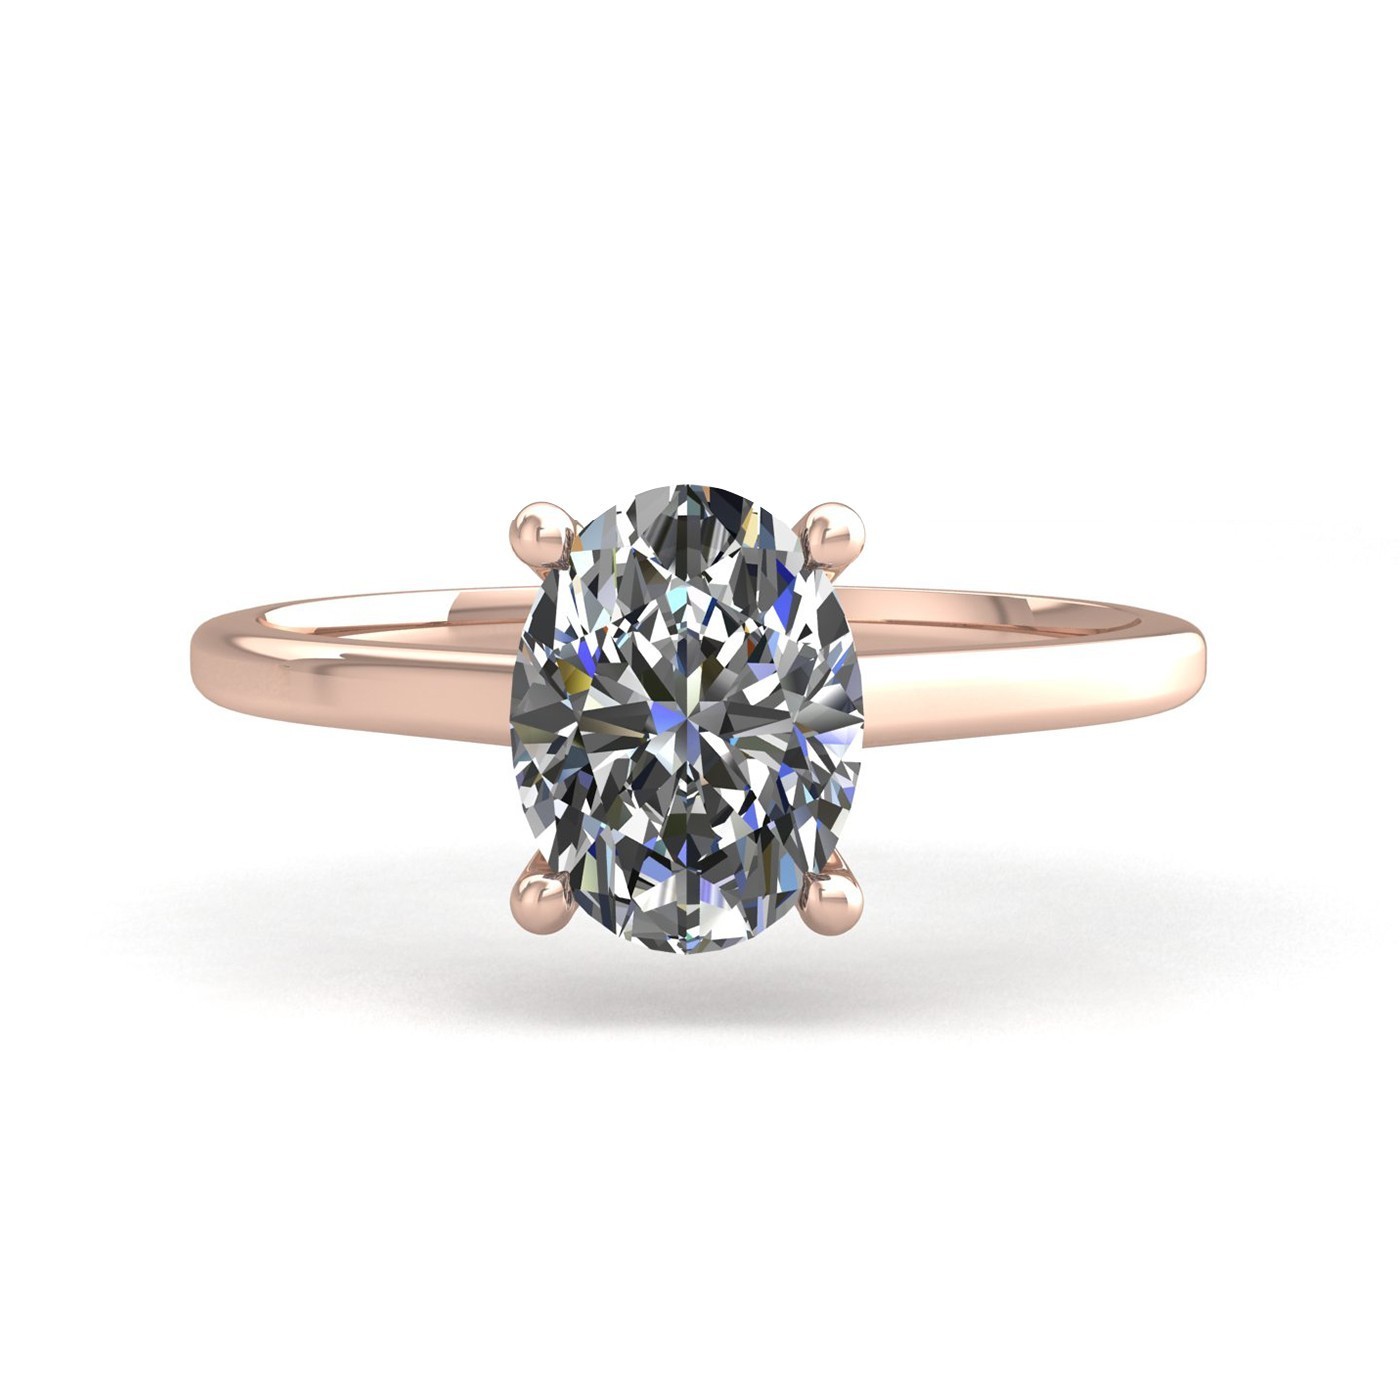 18k rose gold  1,00 ct 4 prongs solitaire oval cut diamond engagement ring with whisper thin band